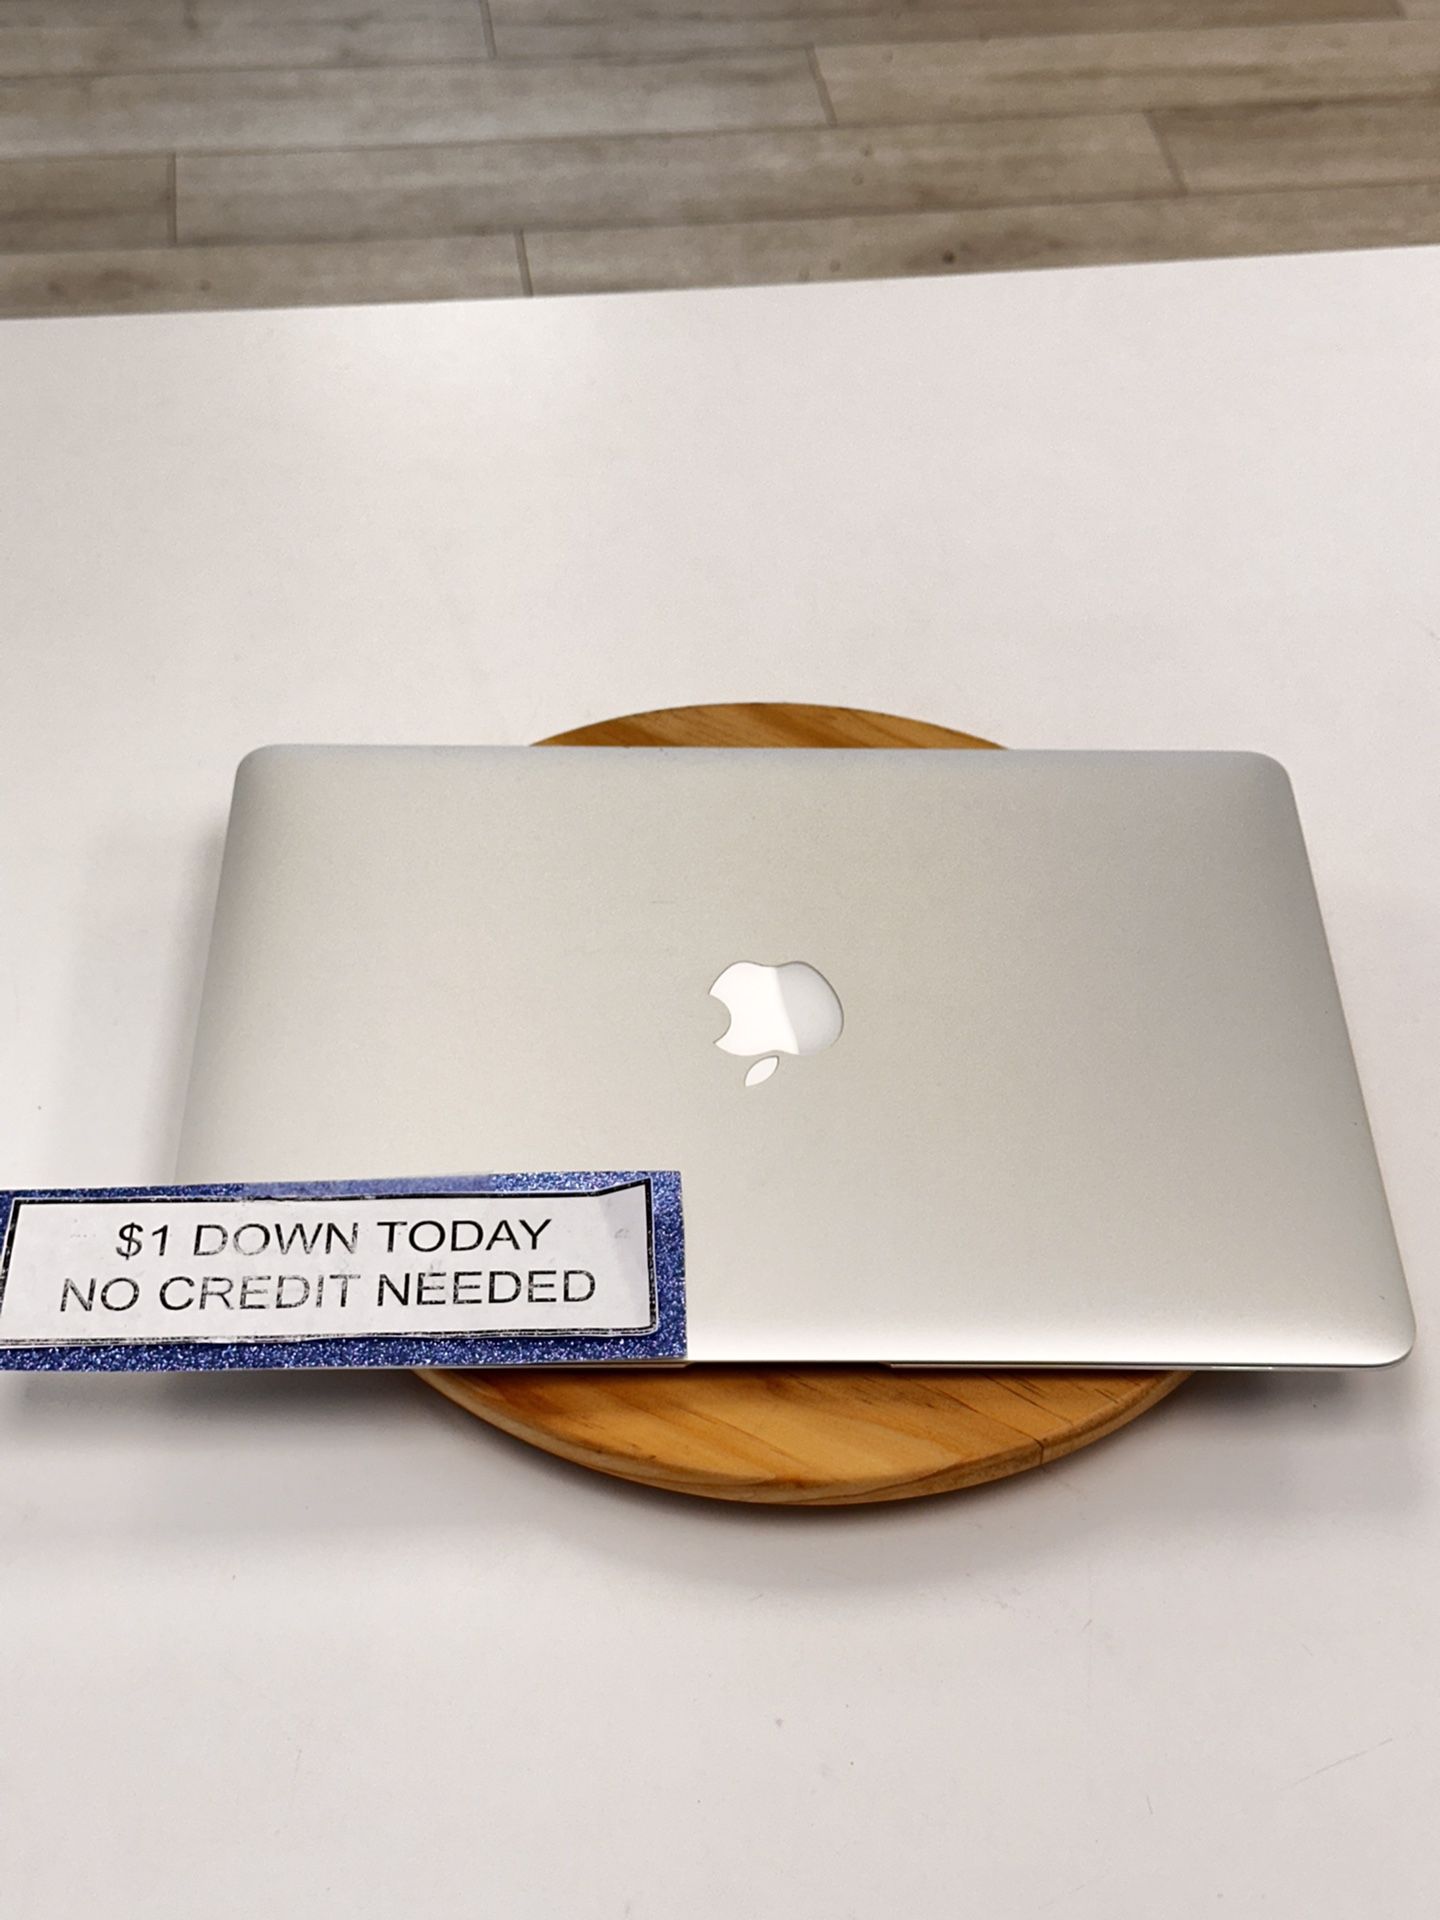 Apple MacBook Air 13 2015 Laptop - Pay $1 Today to Take it Home and Pay the Rest Later!